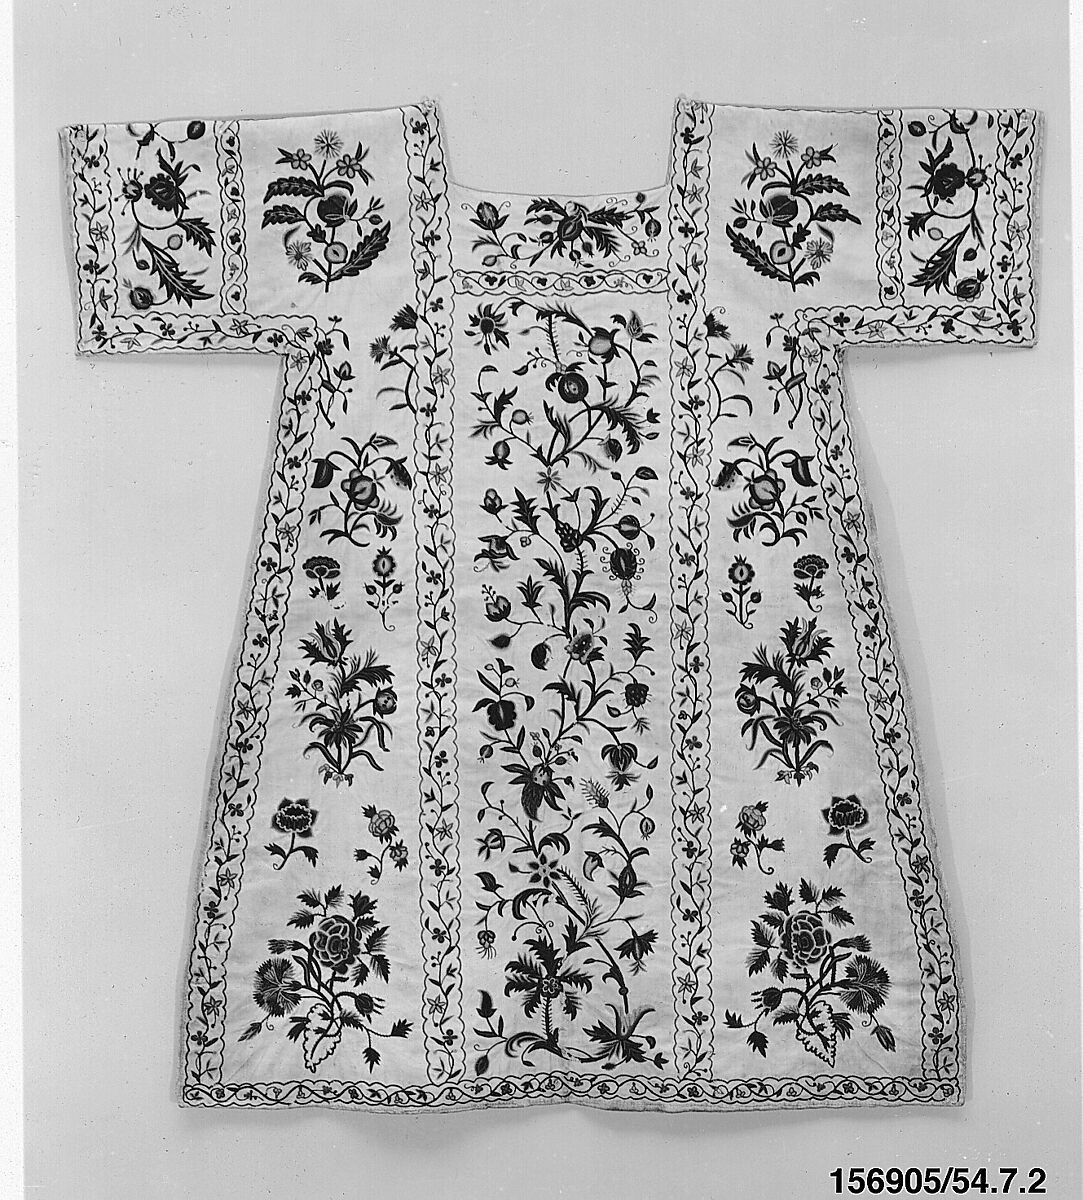 Dalmatic, Wool on linen, French 